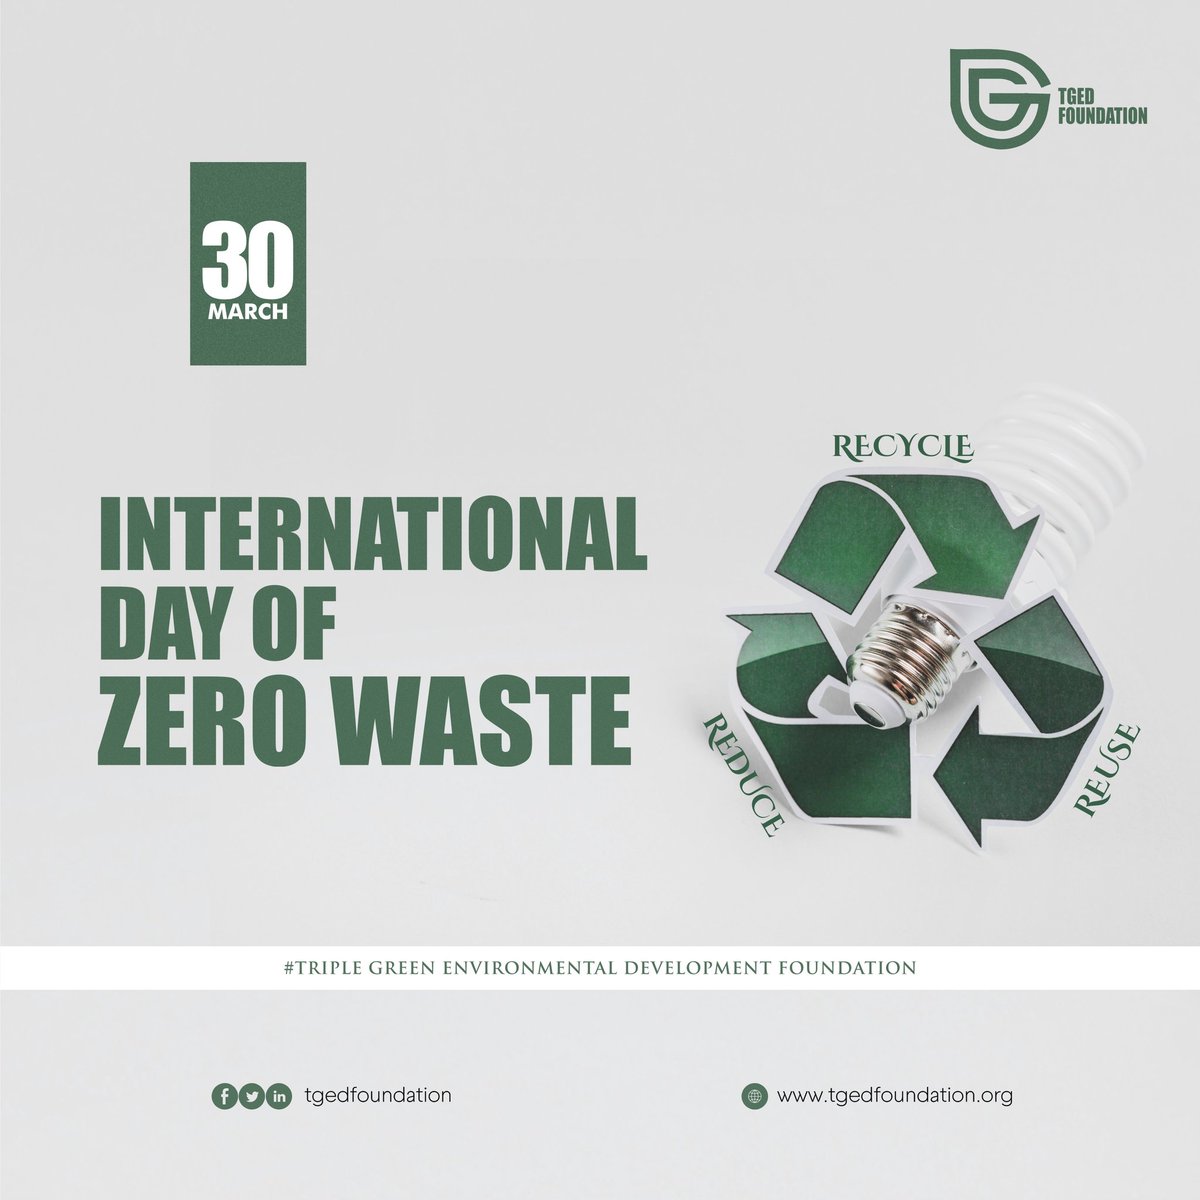 The waste sector contributes to the triple planetary crisis of climate change, biodiversity and nature loss, and pollution. As we commemorate *INTERNATIONAL DAY OF ZERO WASTE* , TGED Foundation is committed to minimize and prevent waste, helping to address the planetary crisis